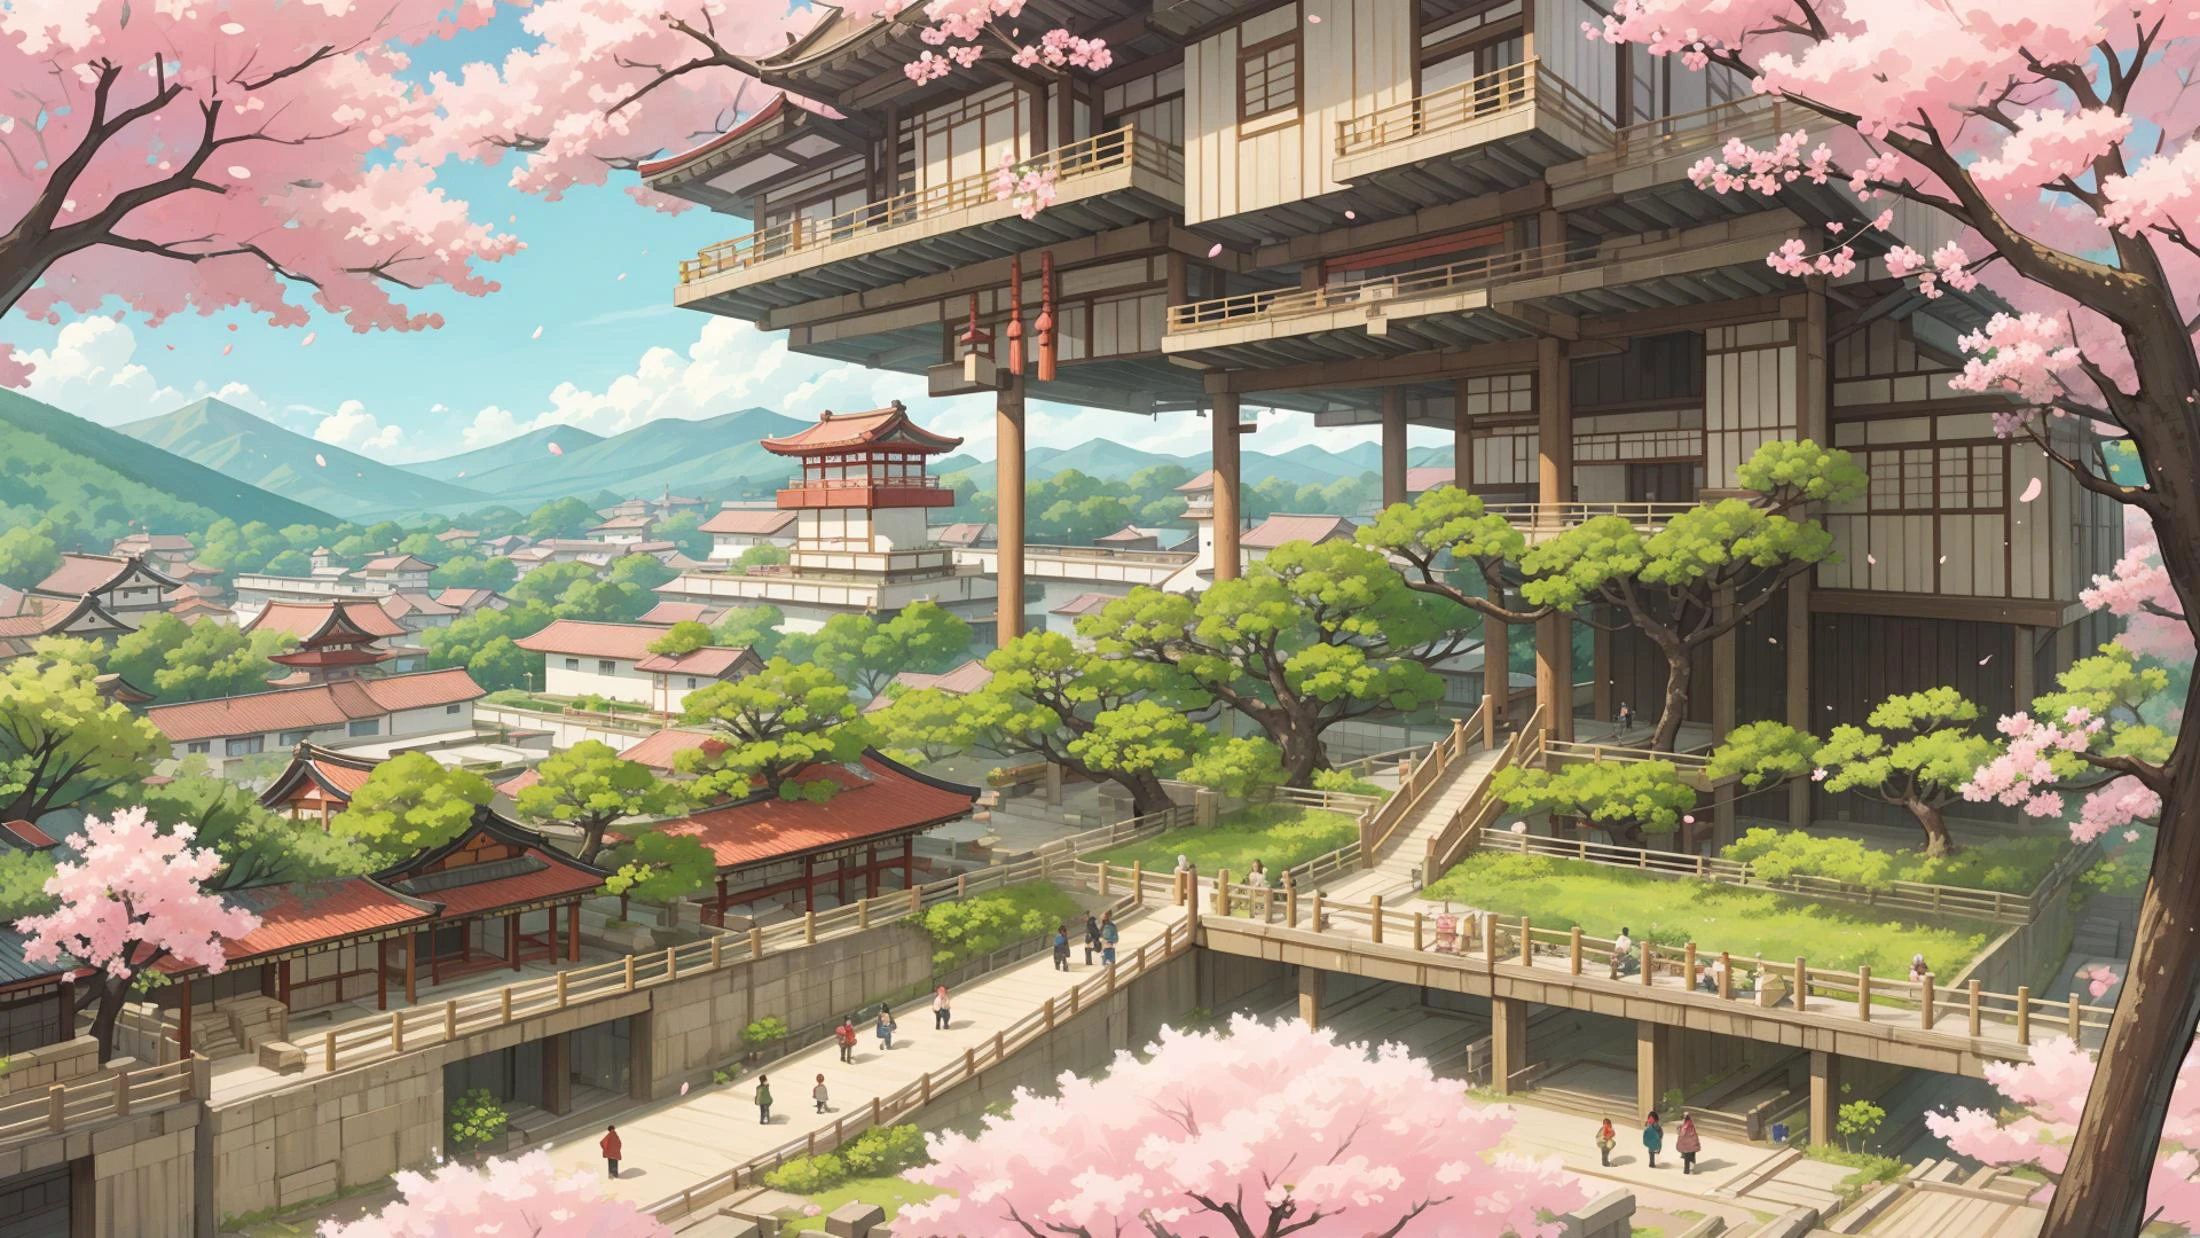 Landscape, Edo period, (Very gigantic multi-storey building complex:1.4), (Multi-storey structure:1.2), Mysterious Shinto facilities in the mountains, Many people passing through the city, Shot from a great distance, View from the sky, Merged with nature, Cherry blossoms in full bloom